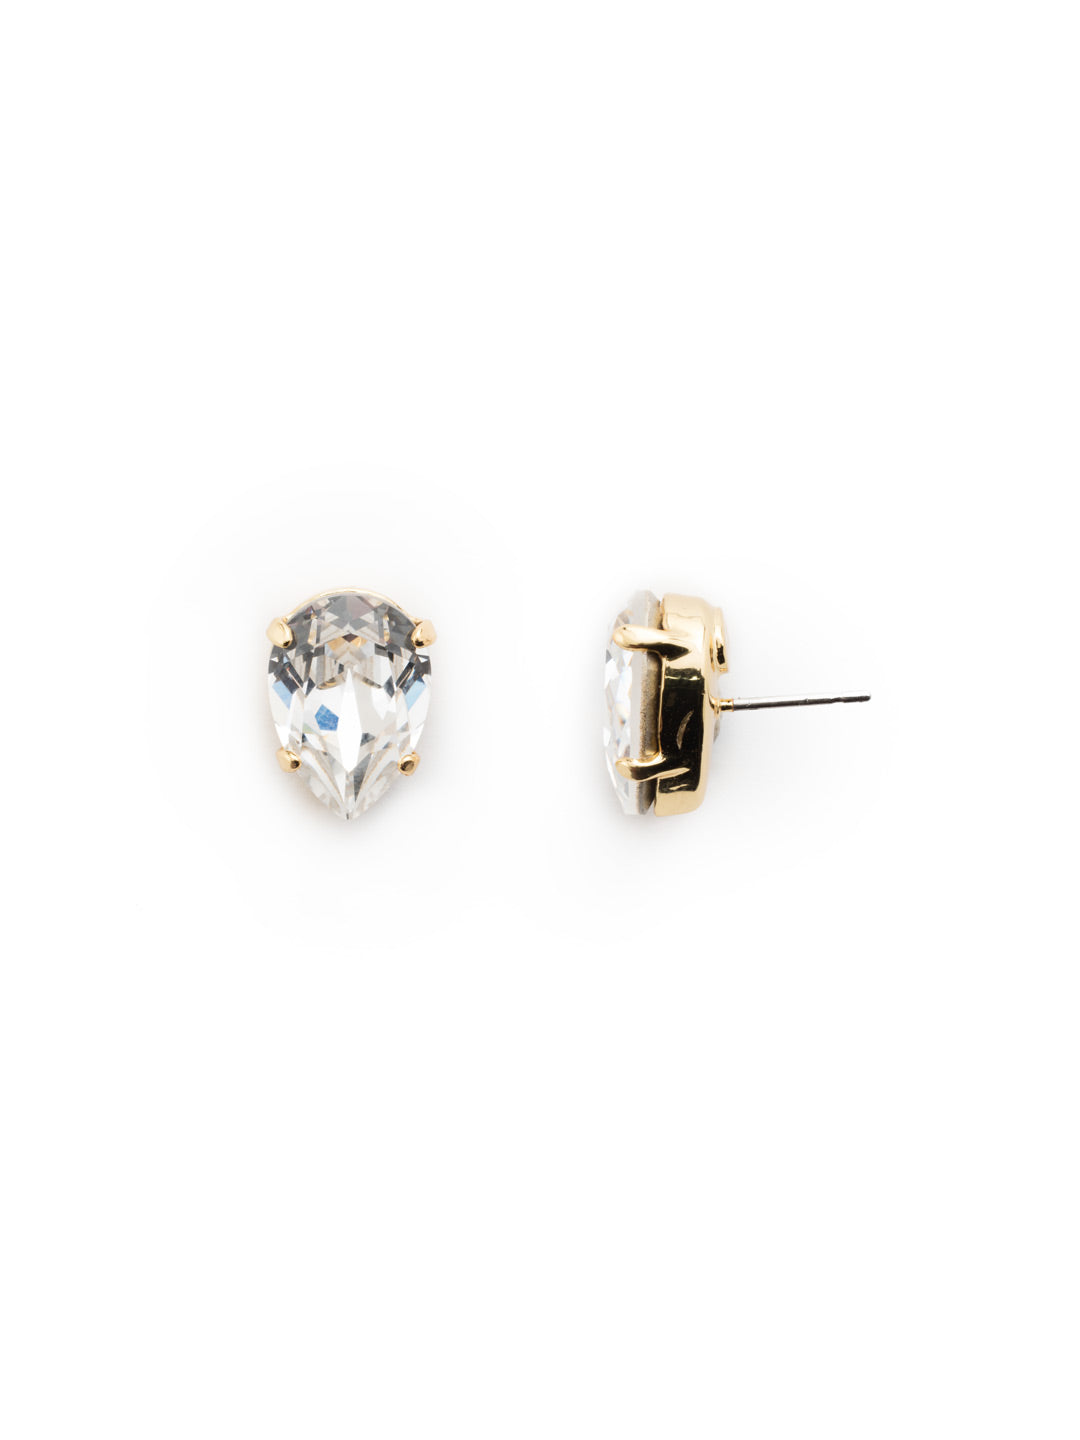 Ginnie Stud Earrings - ECR115BGCRY - <p>A beautiful basic stud. These classic single teardrop post earrings are perfect for any occasion, especially the everyday look. A timeless treasure that will sparkle season after season. From Sorrelli's Crystal collection in our Bright Gold-tone finish.</p>